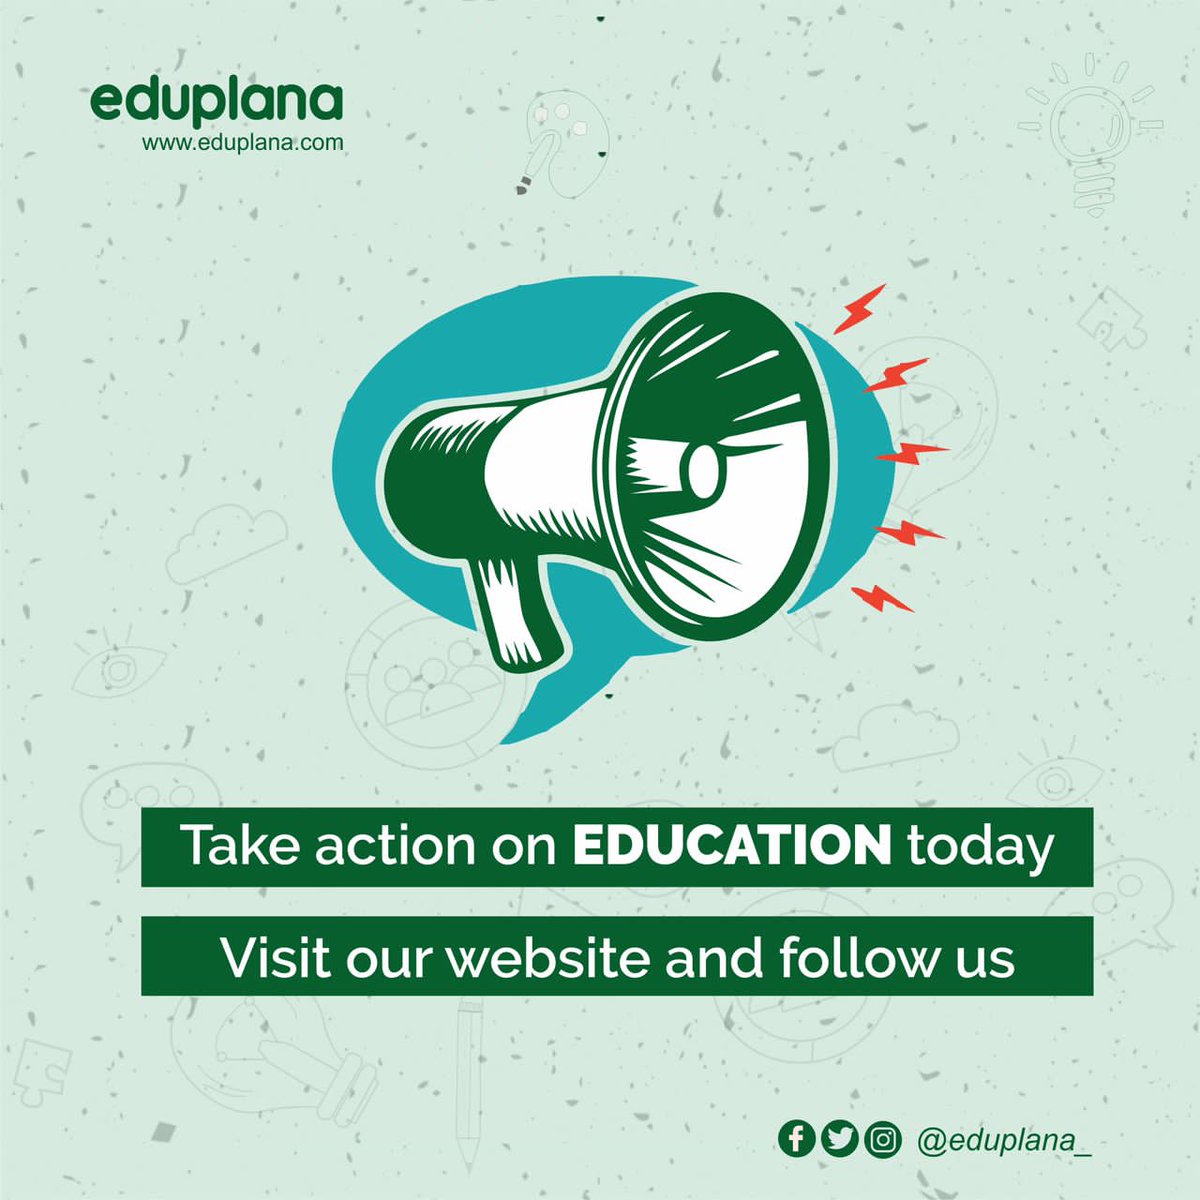 We cannot WISH for a better education sector but we can DEMAND a Change. 

Join #PlanEducation and Let's raise our VOICES together. 

Follow Eduplana today.